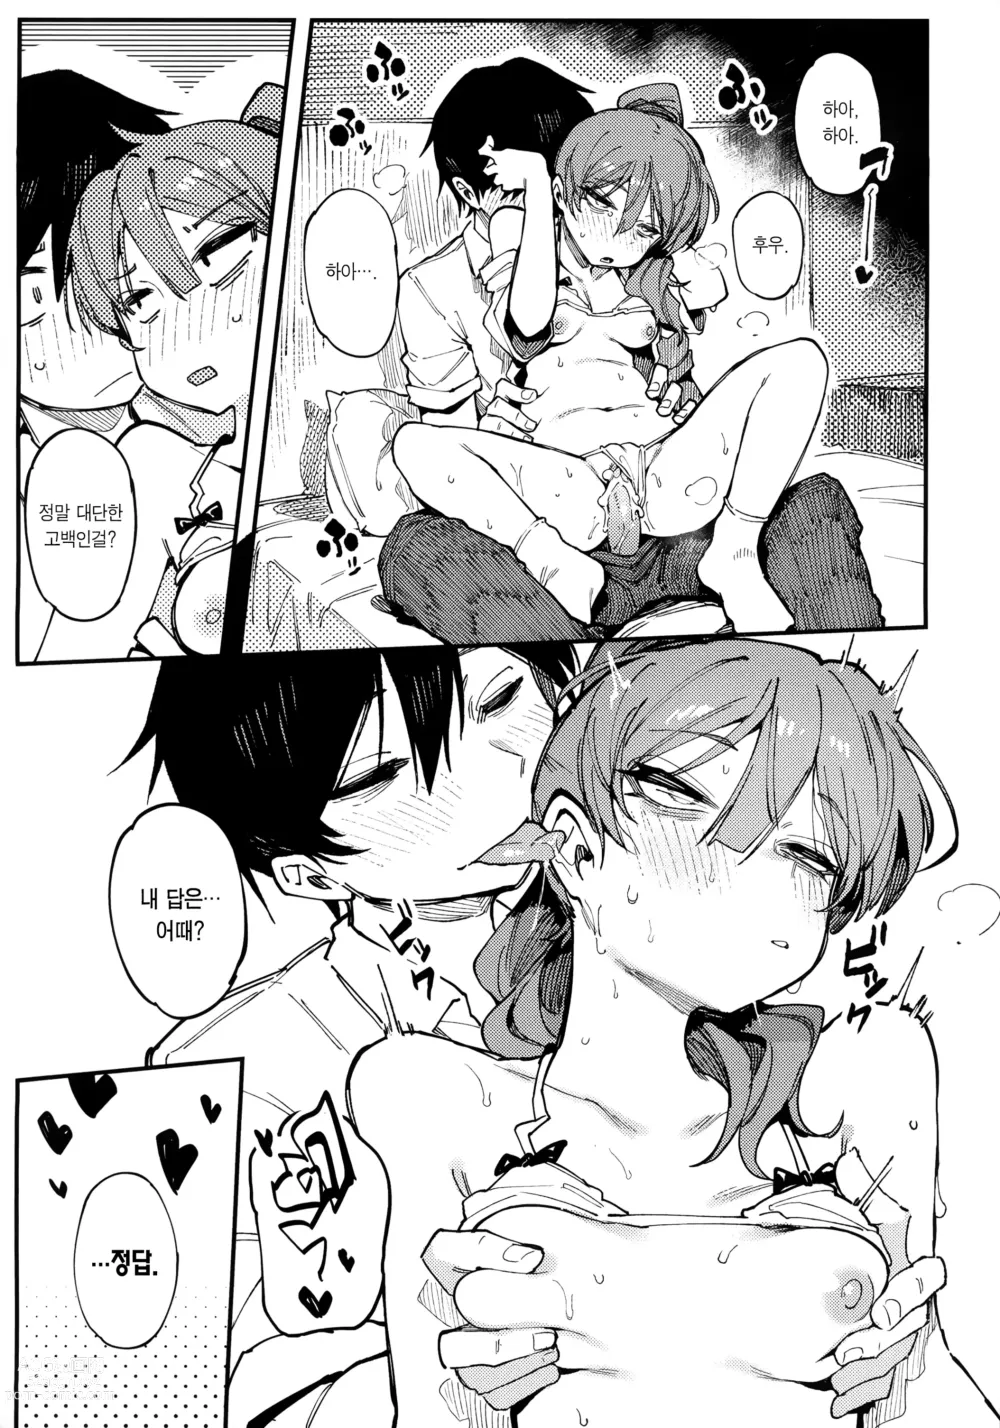 Page 39 of doujinshi 수학 1 상 (decensored)